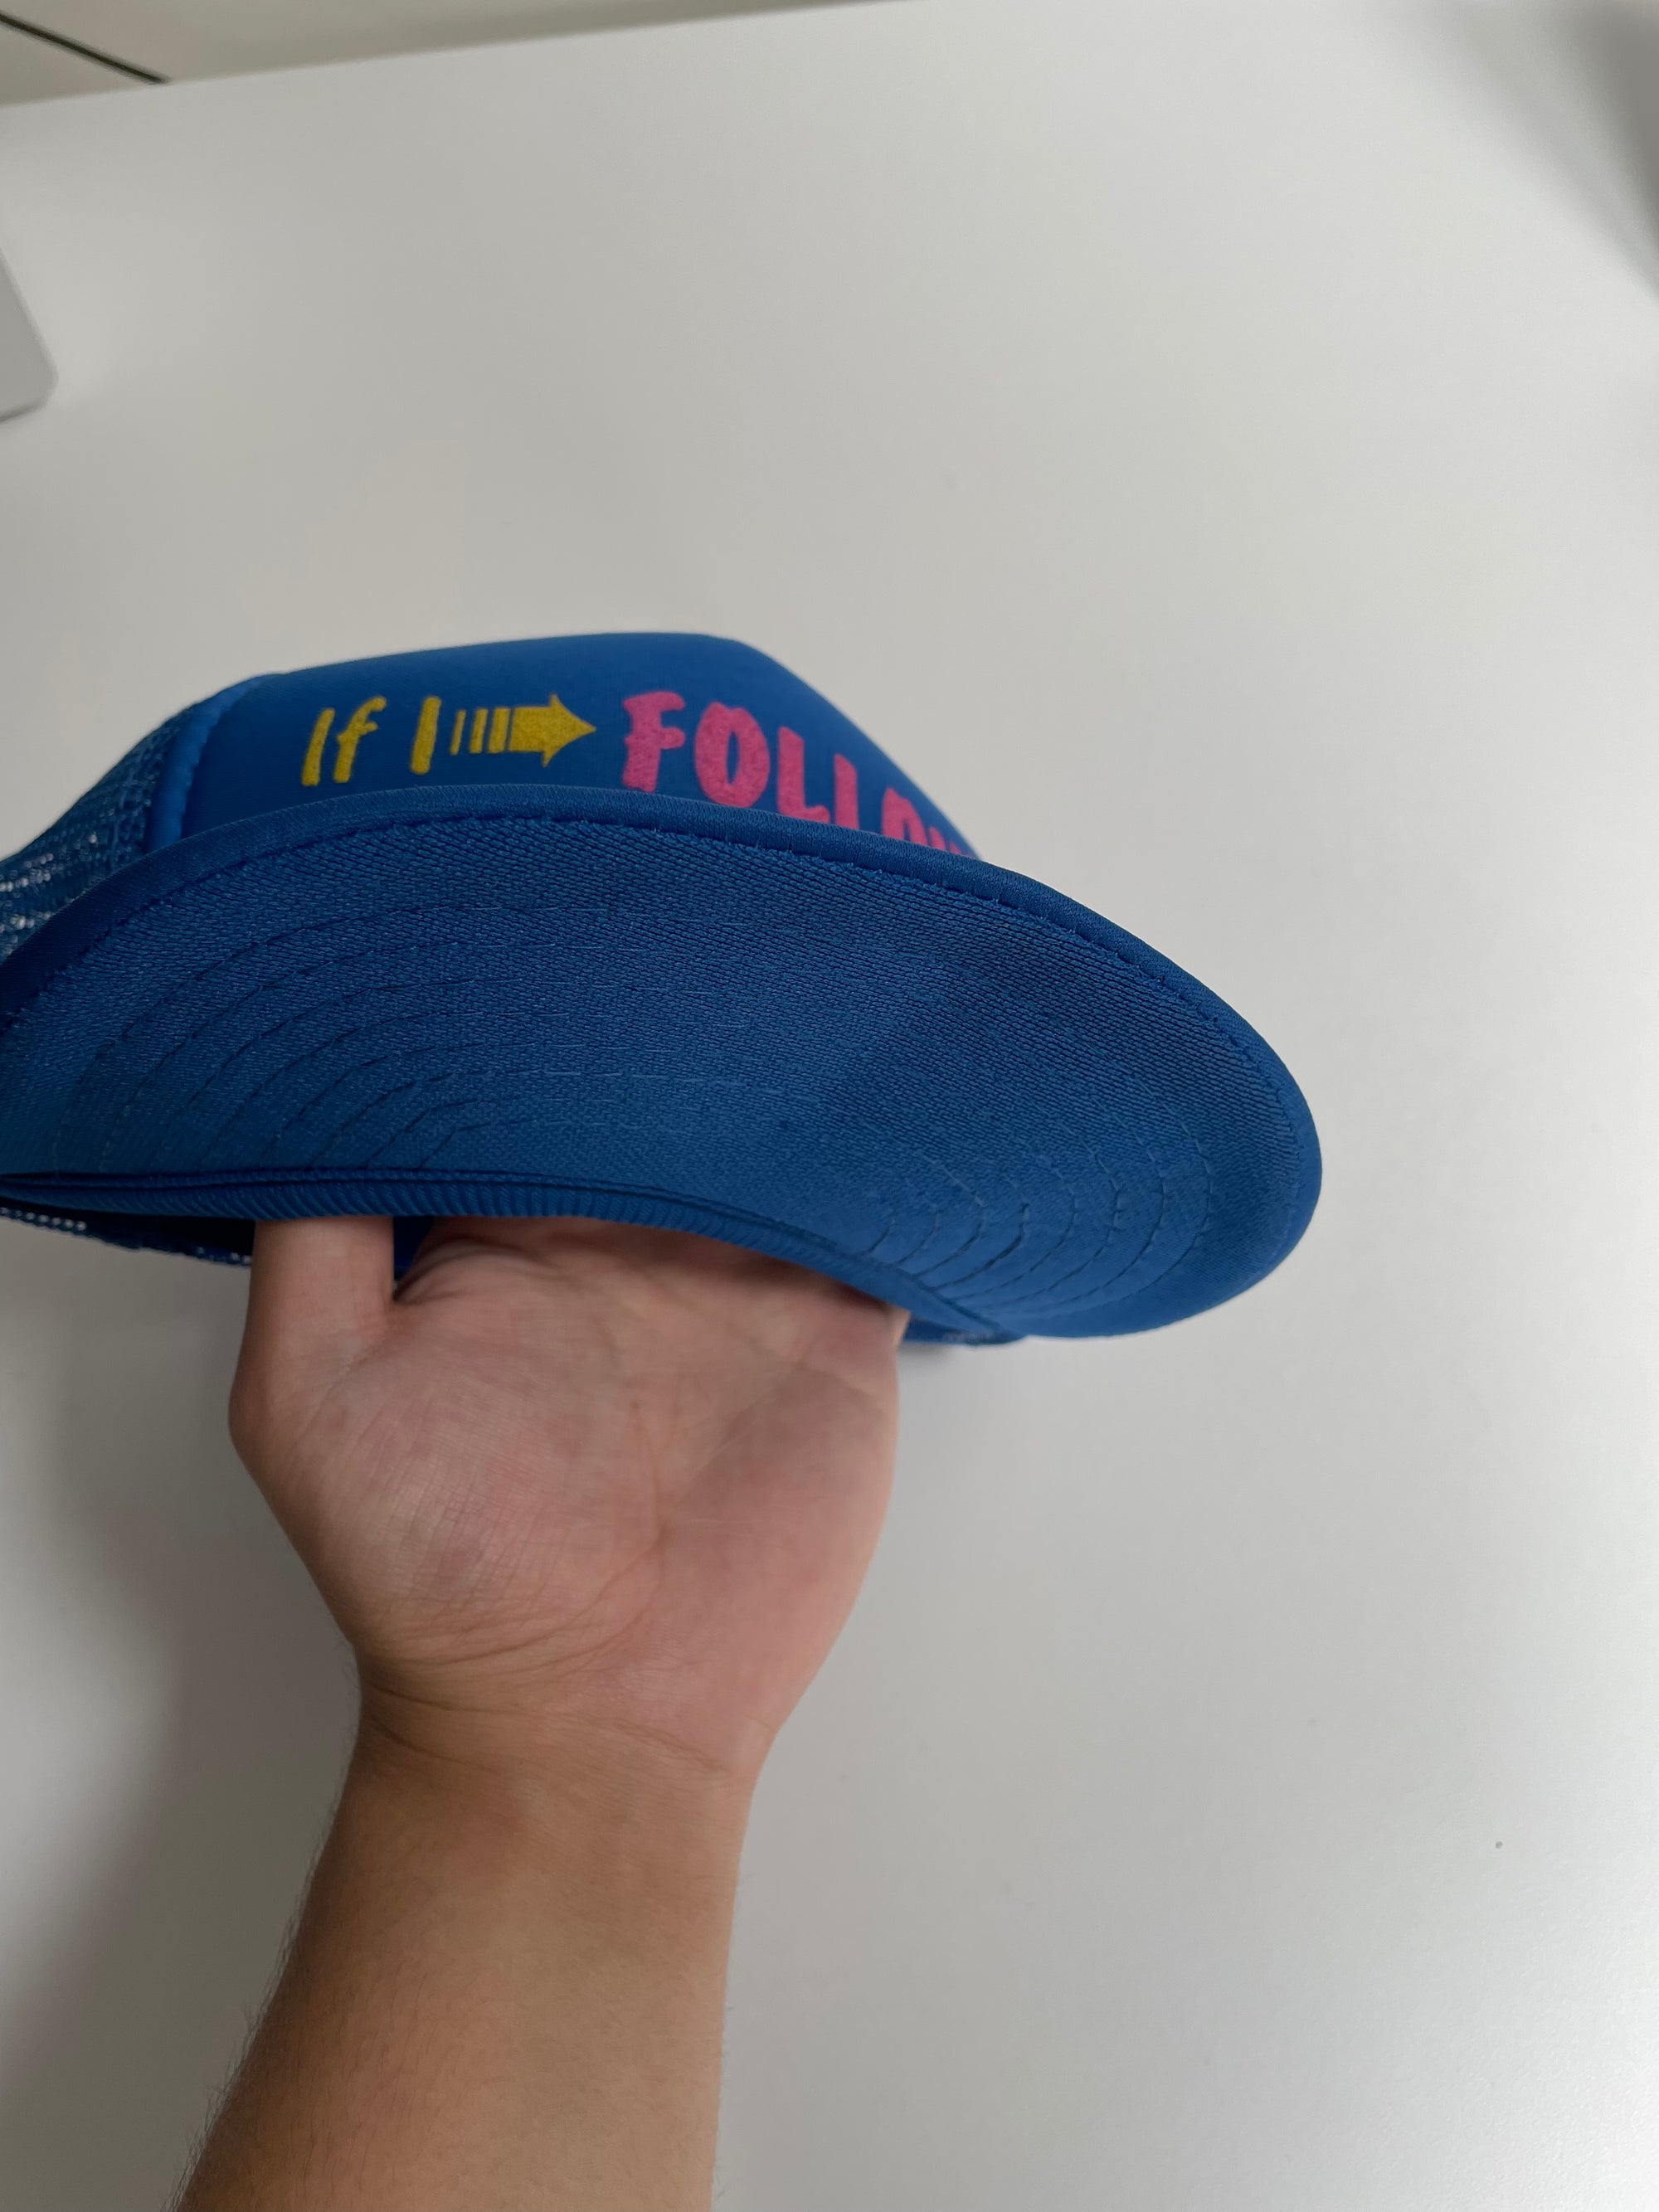 1980s “Will You Keep Me?” Trucker Hat